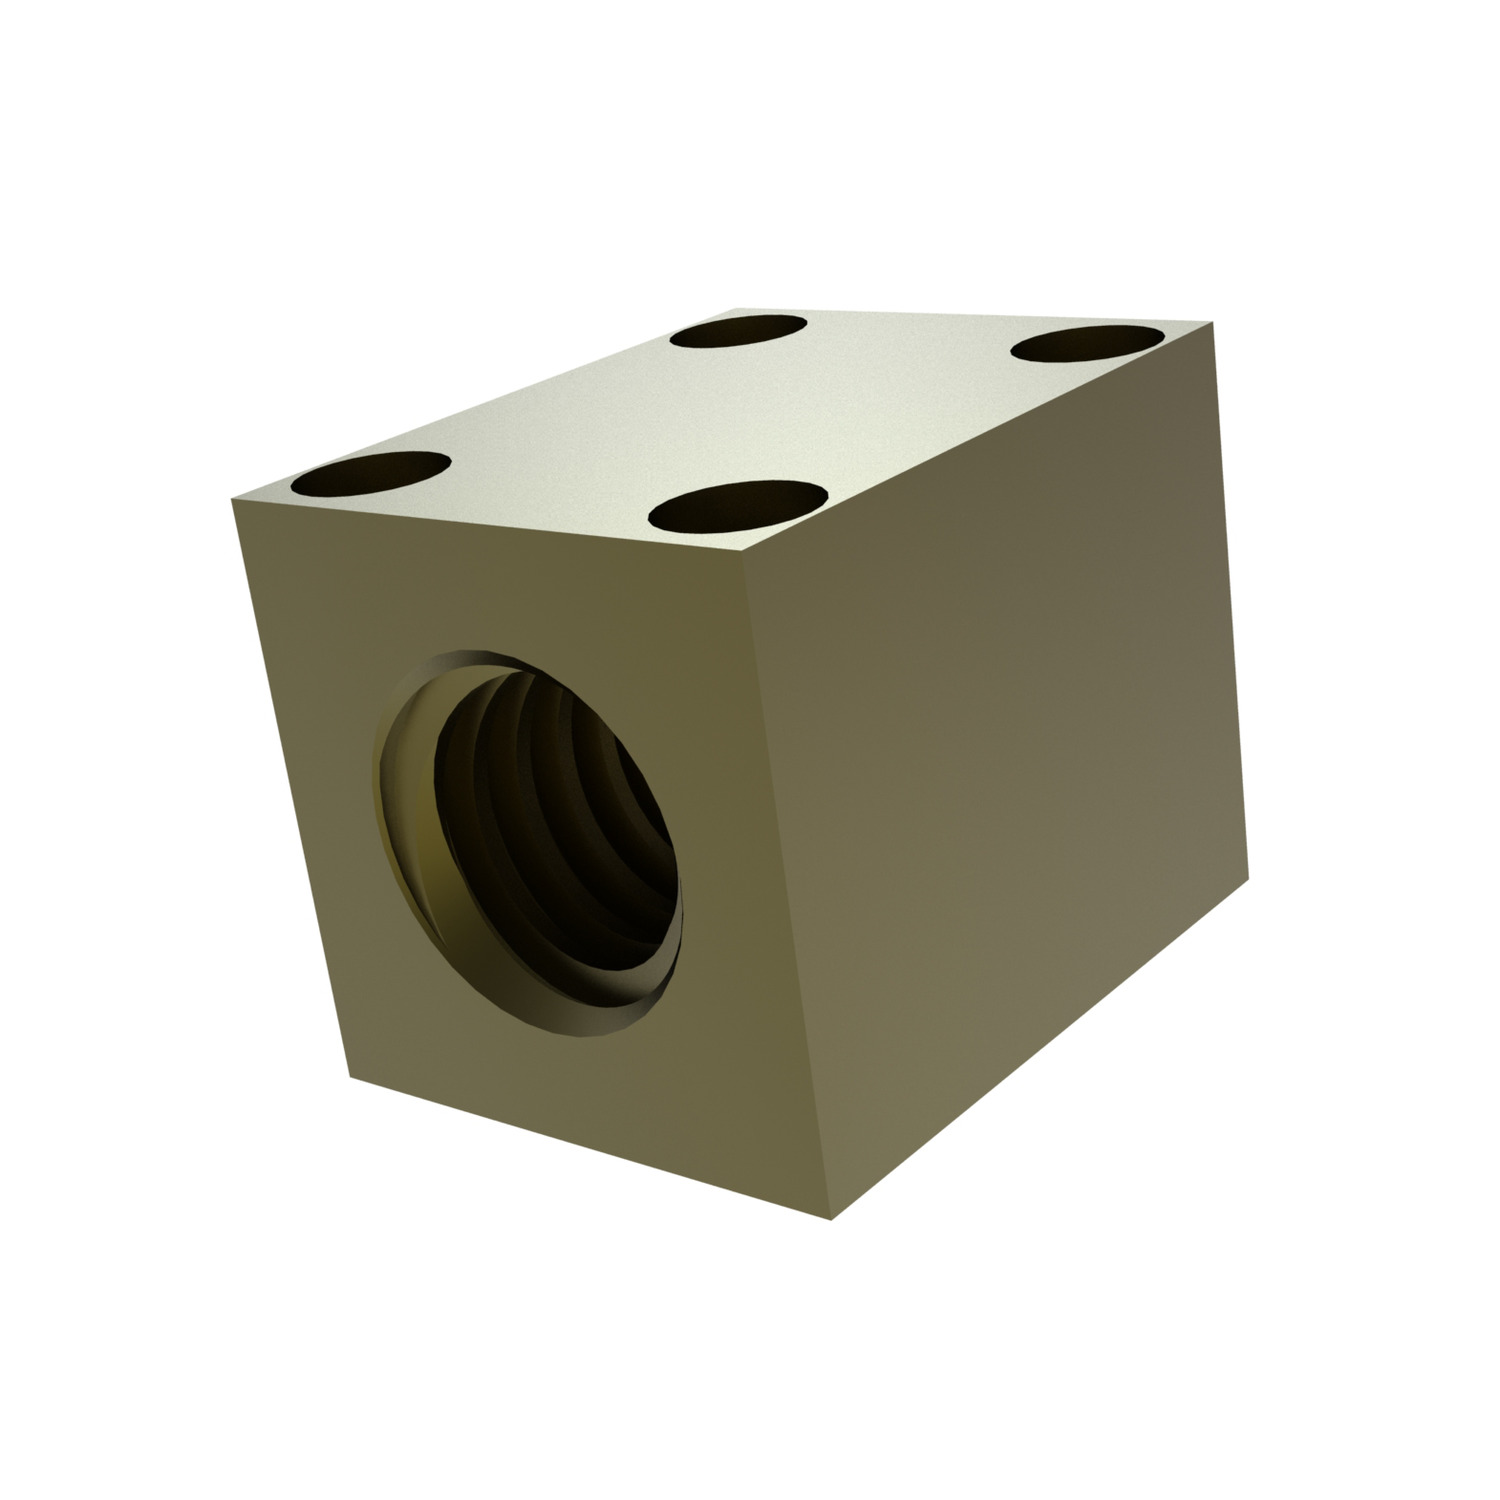 Product L1334, Square Bronze Nut with Through Holes for lead screws / 